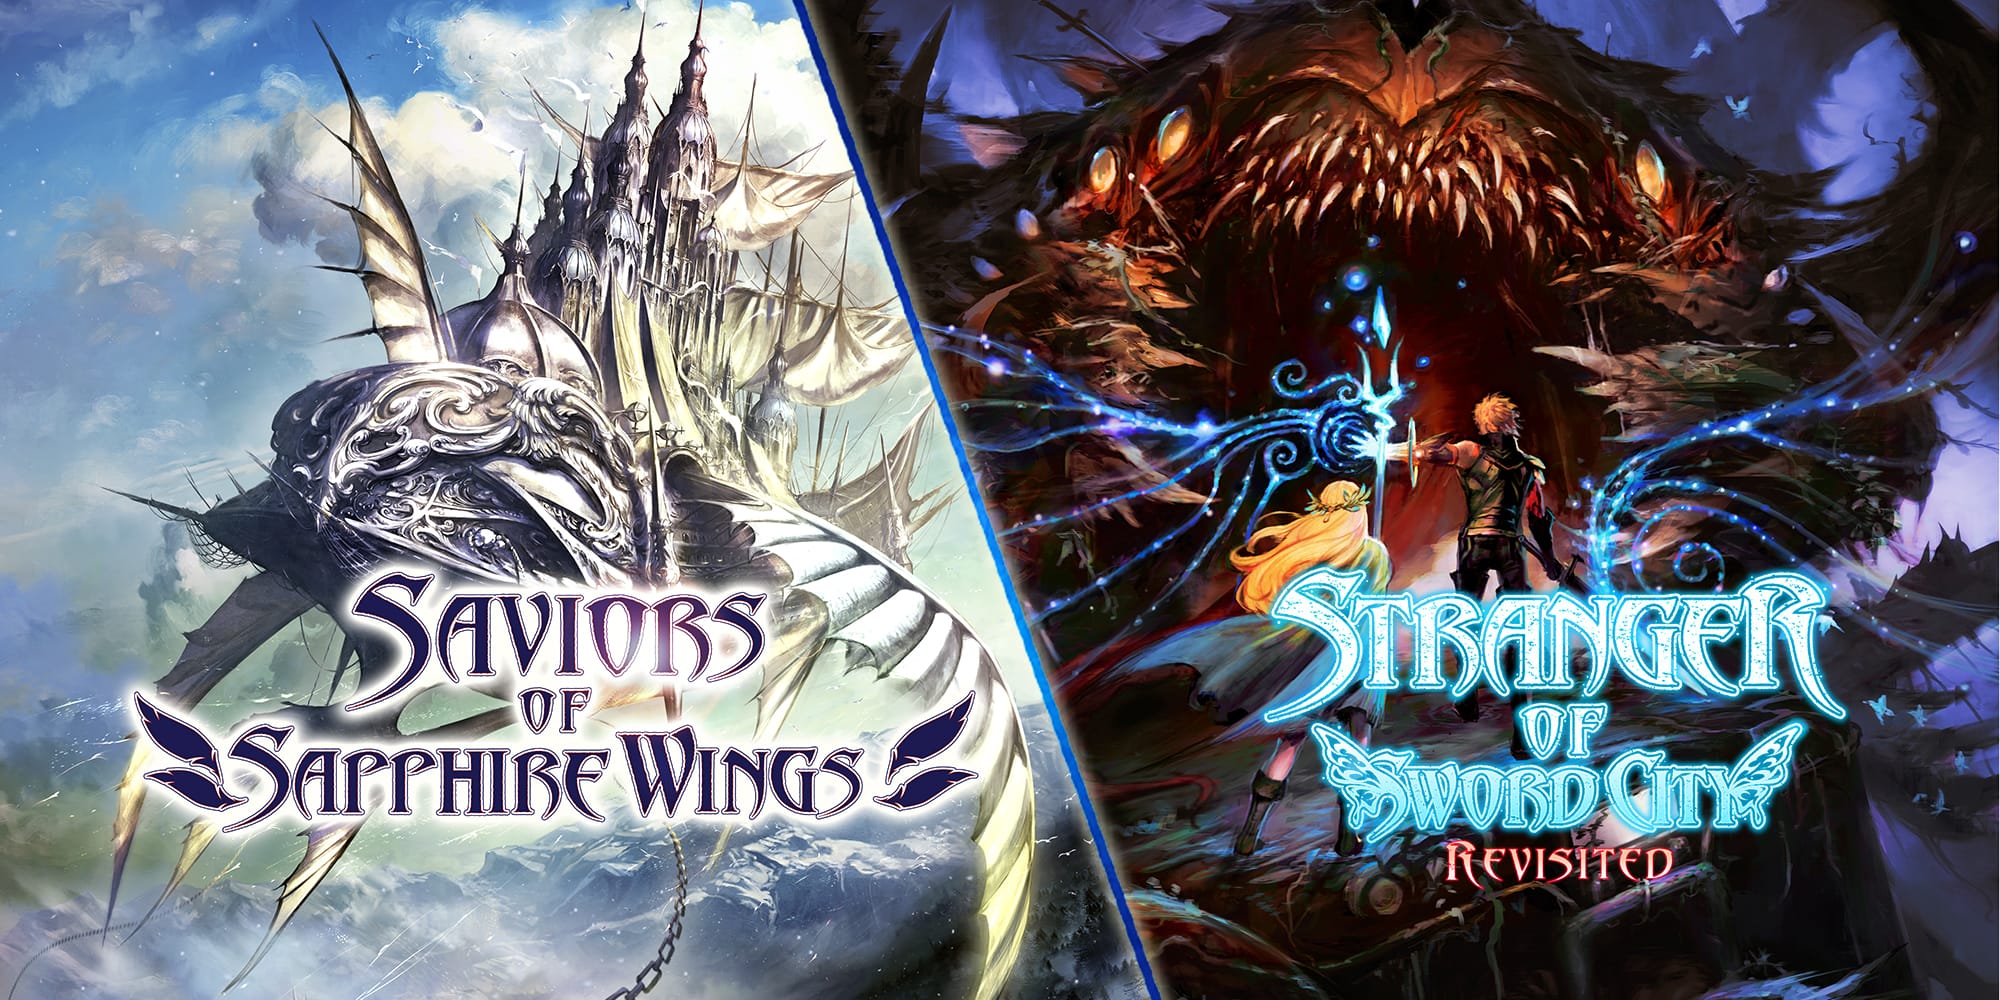 Read more about the article Saviors Of Sapphire Wings/Stranger Of Sword City Revisited